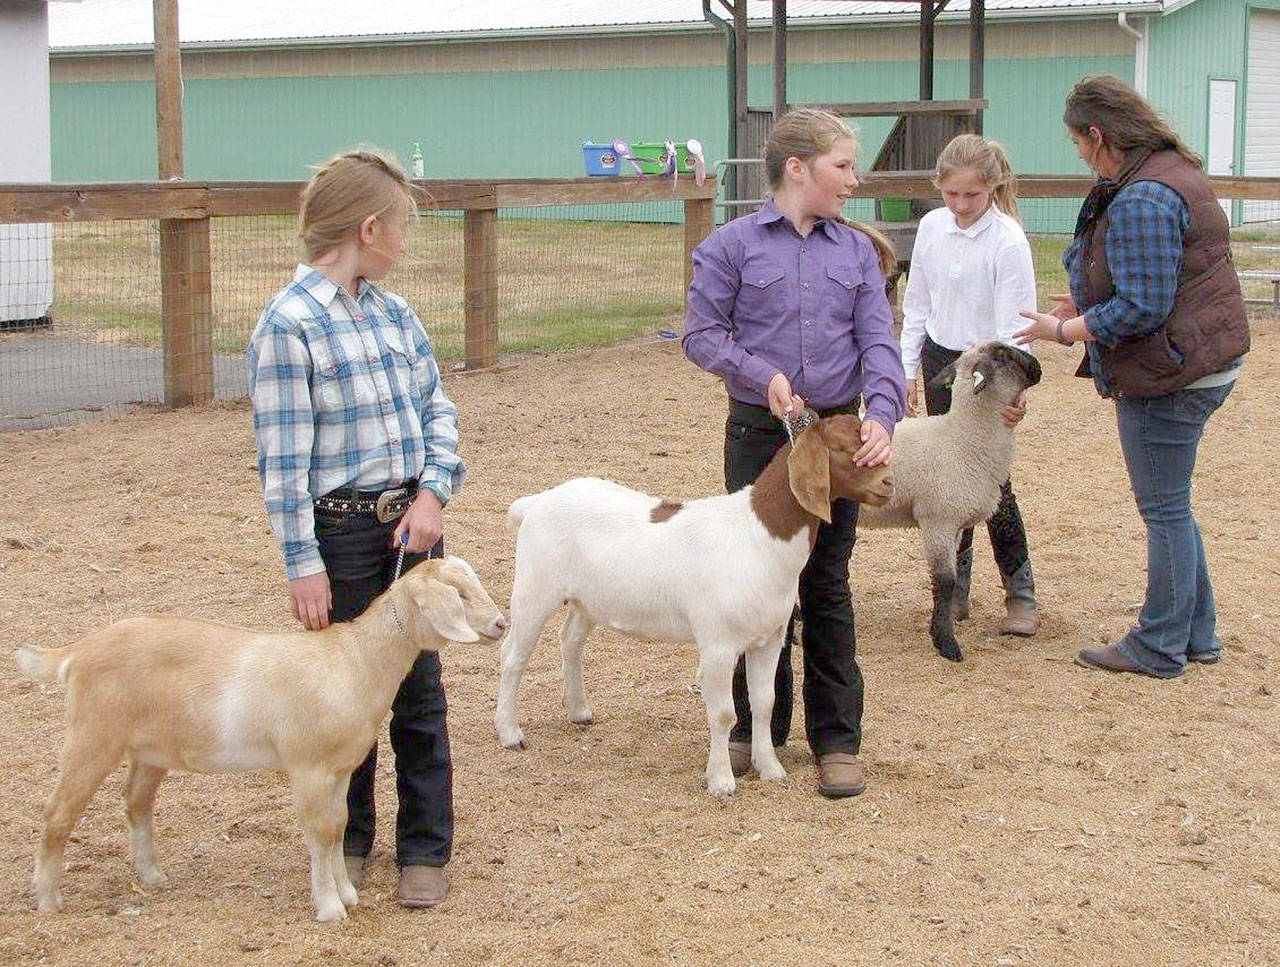 Goats and sheep are two of the animal species that youth can show at the Port Angeles Summer Classic Youth Animal Show in June — register by May 12. Photo by Clallam County 4-H